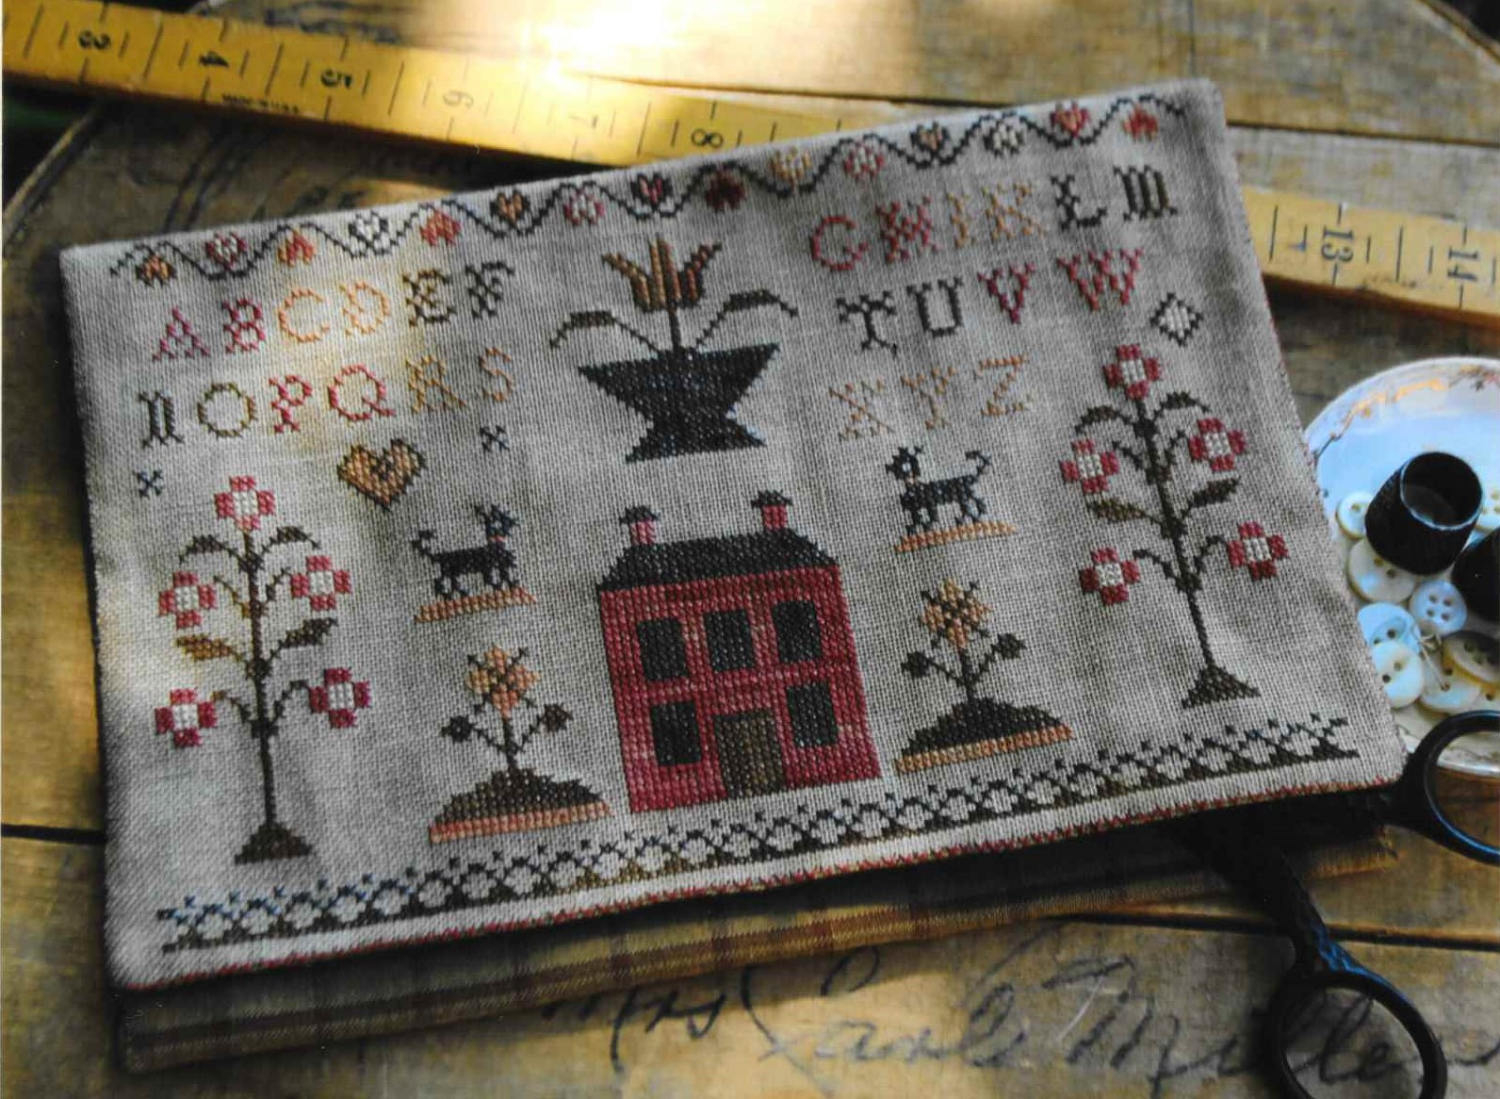 Colonial Embroidery Patterns Counted Cross Stitch Pattern Schoolgirl Sampler Sewing Bag